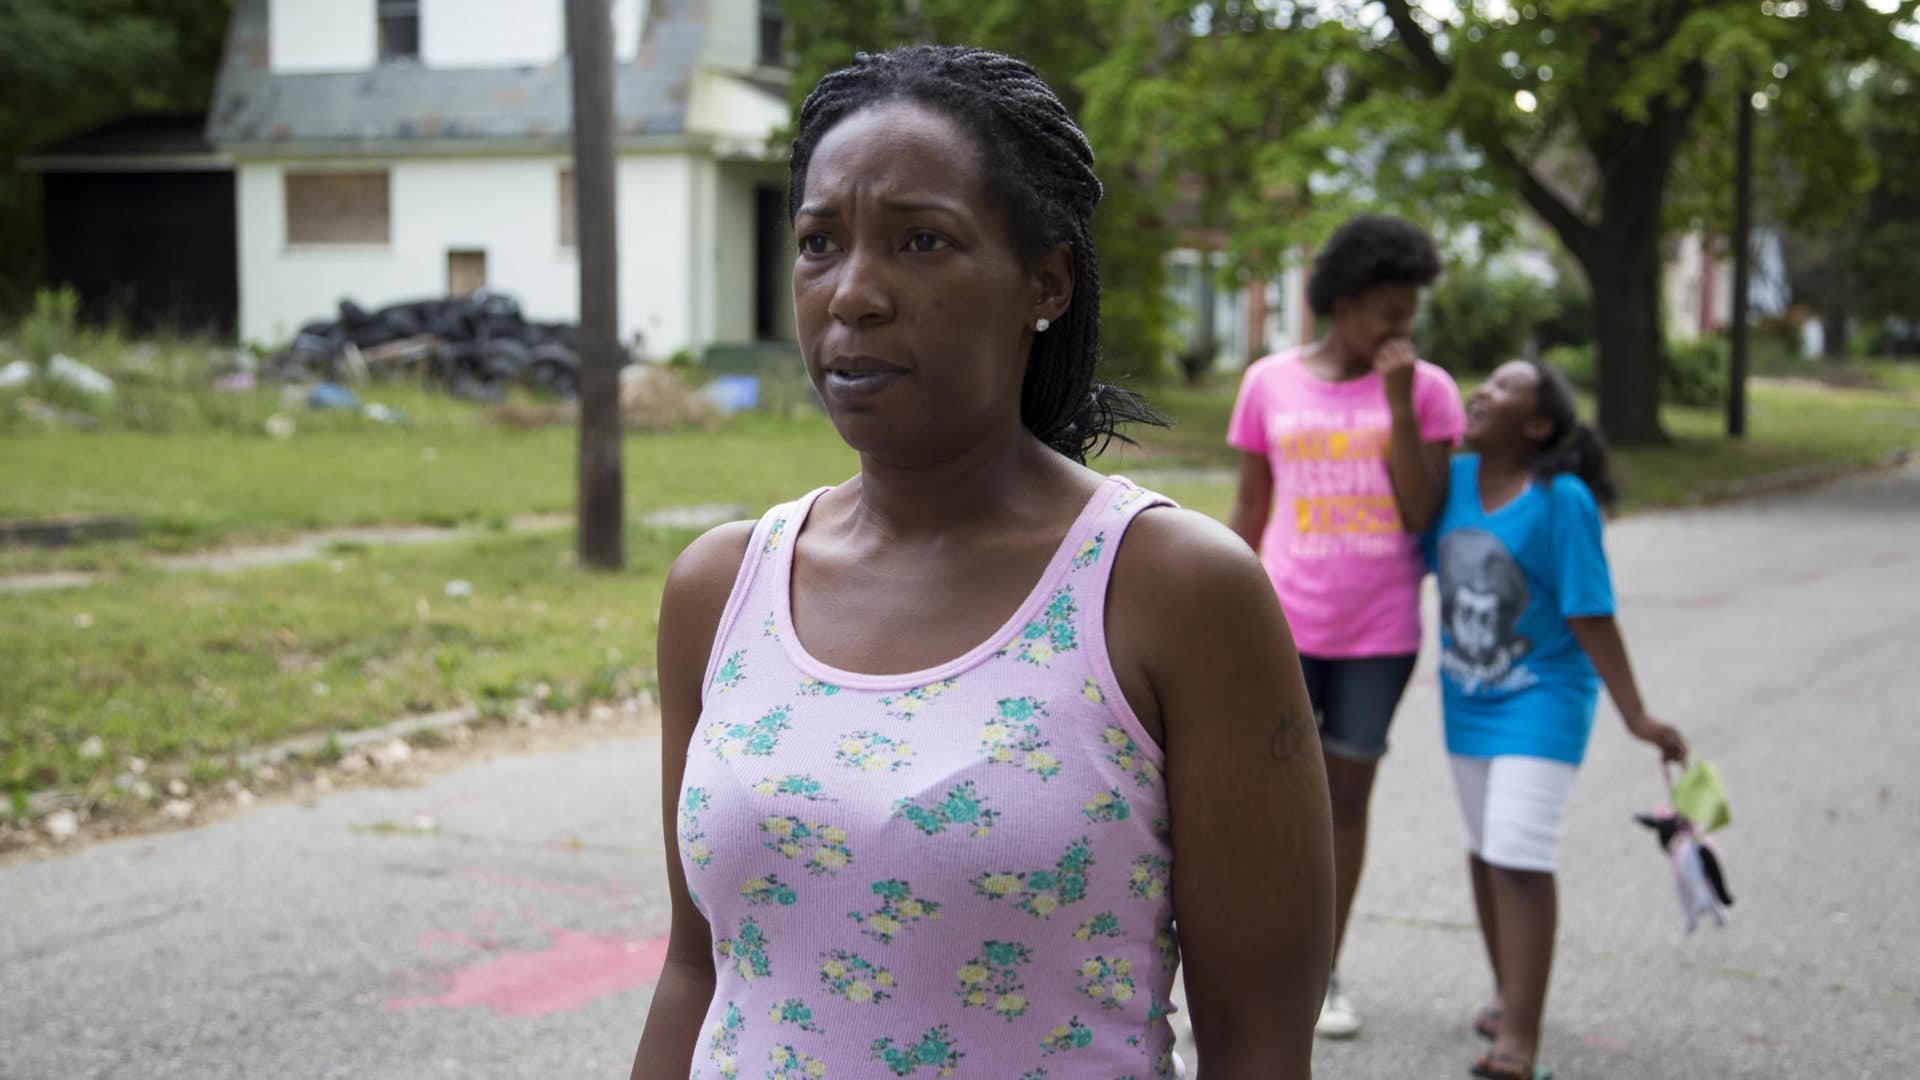 Gina Luster, 41, worries that the real impacts of lead in her daughter's blood will not be known for years. And yet there's nothing to be done.